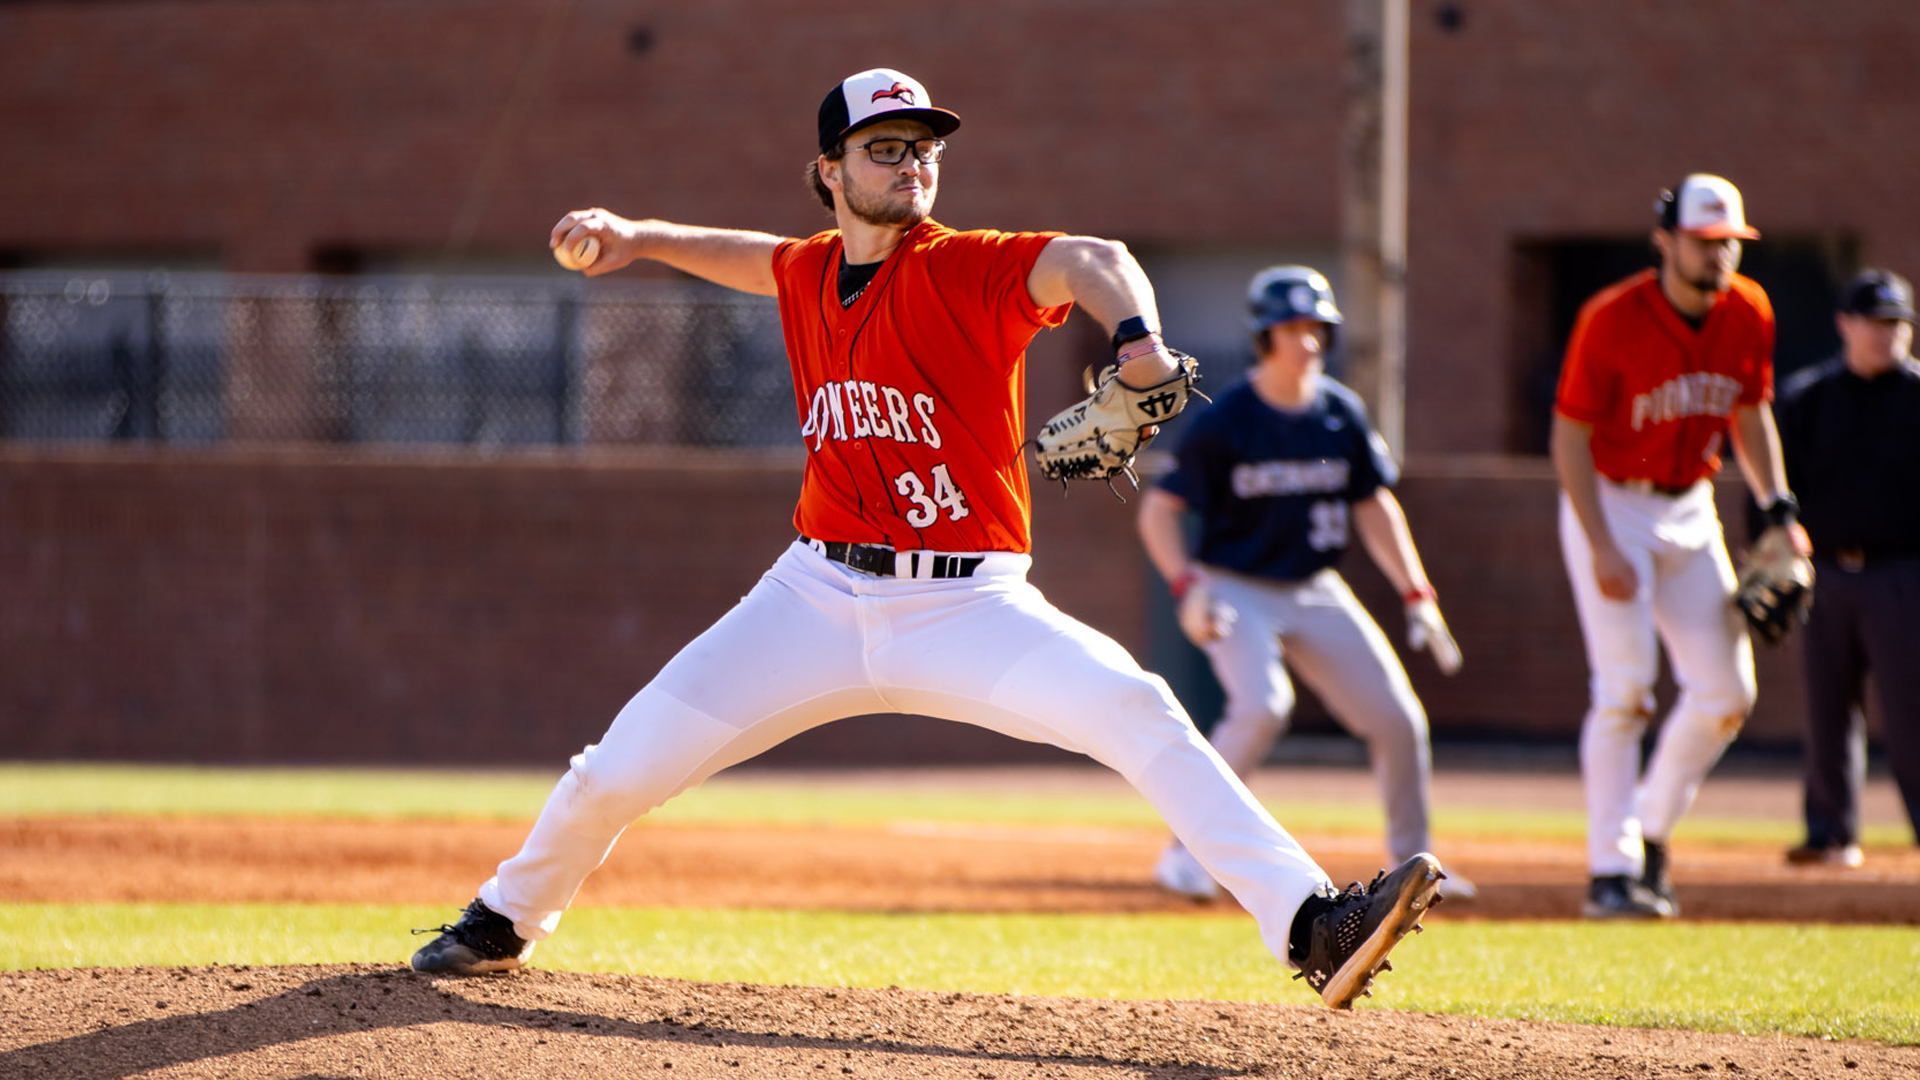 Luke Absher pitched the Pioneers to a 4-2 win in Sunday's opener with Catawba (photo by Kari Ham)